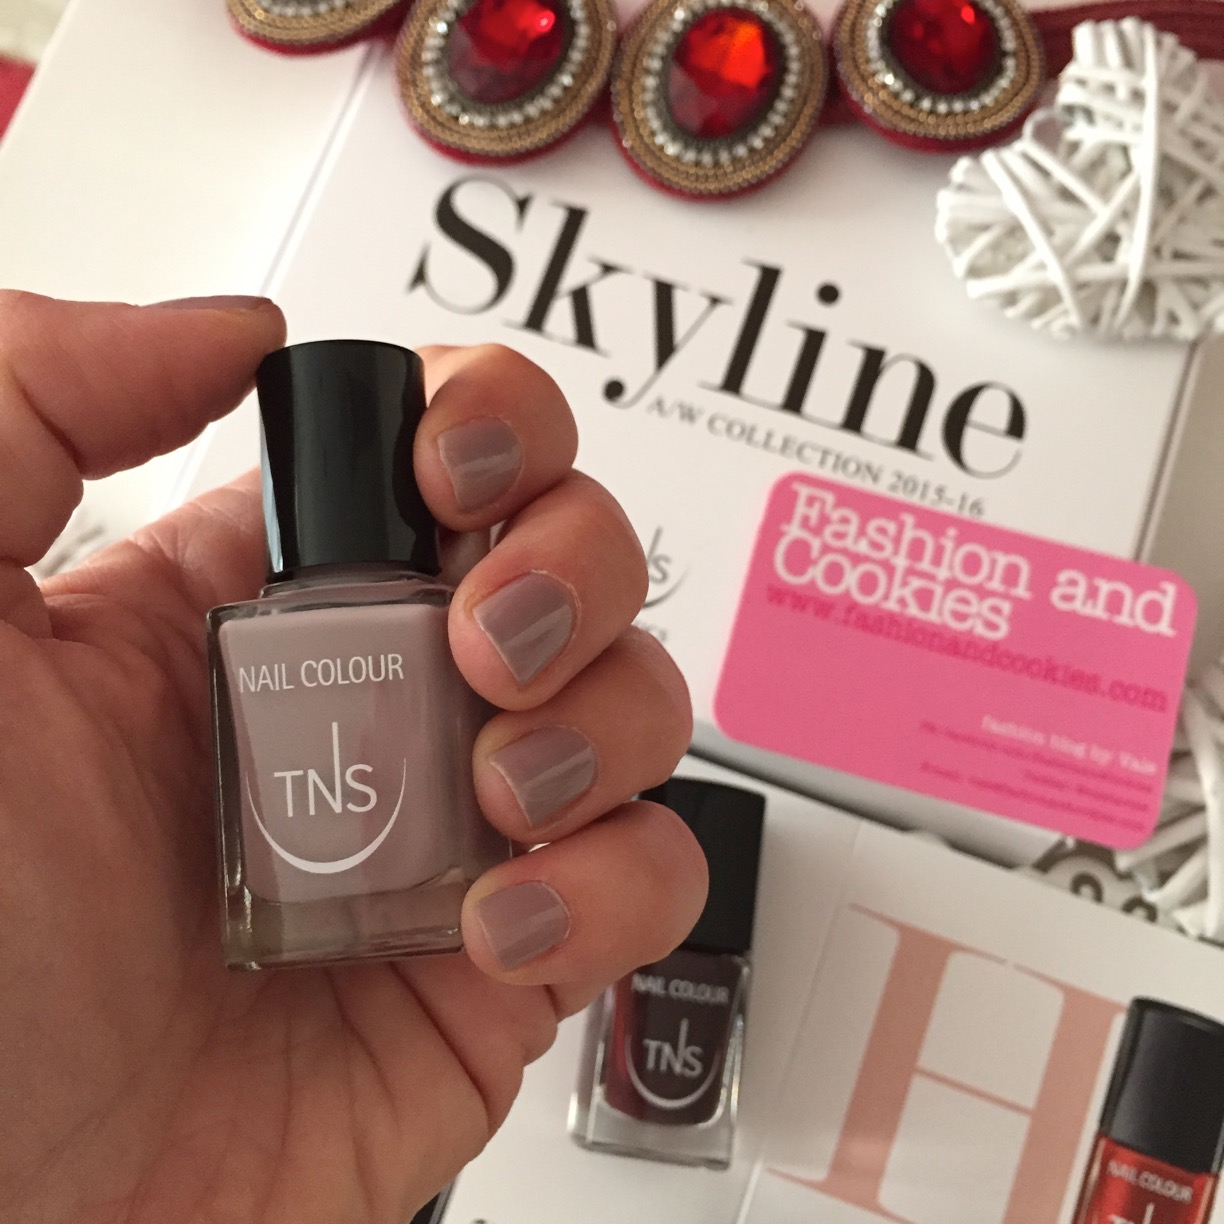 Skyline Collection, Skyline nail polish by TNS Cosmetics on Fashion and Cookies beauty blog, beauty blogger